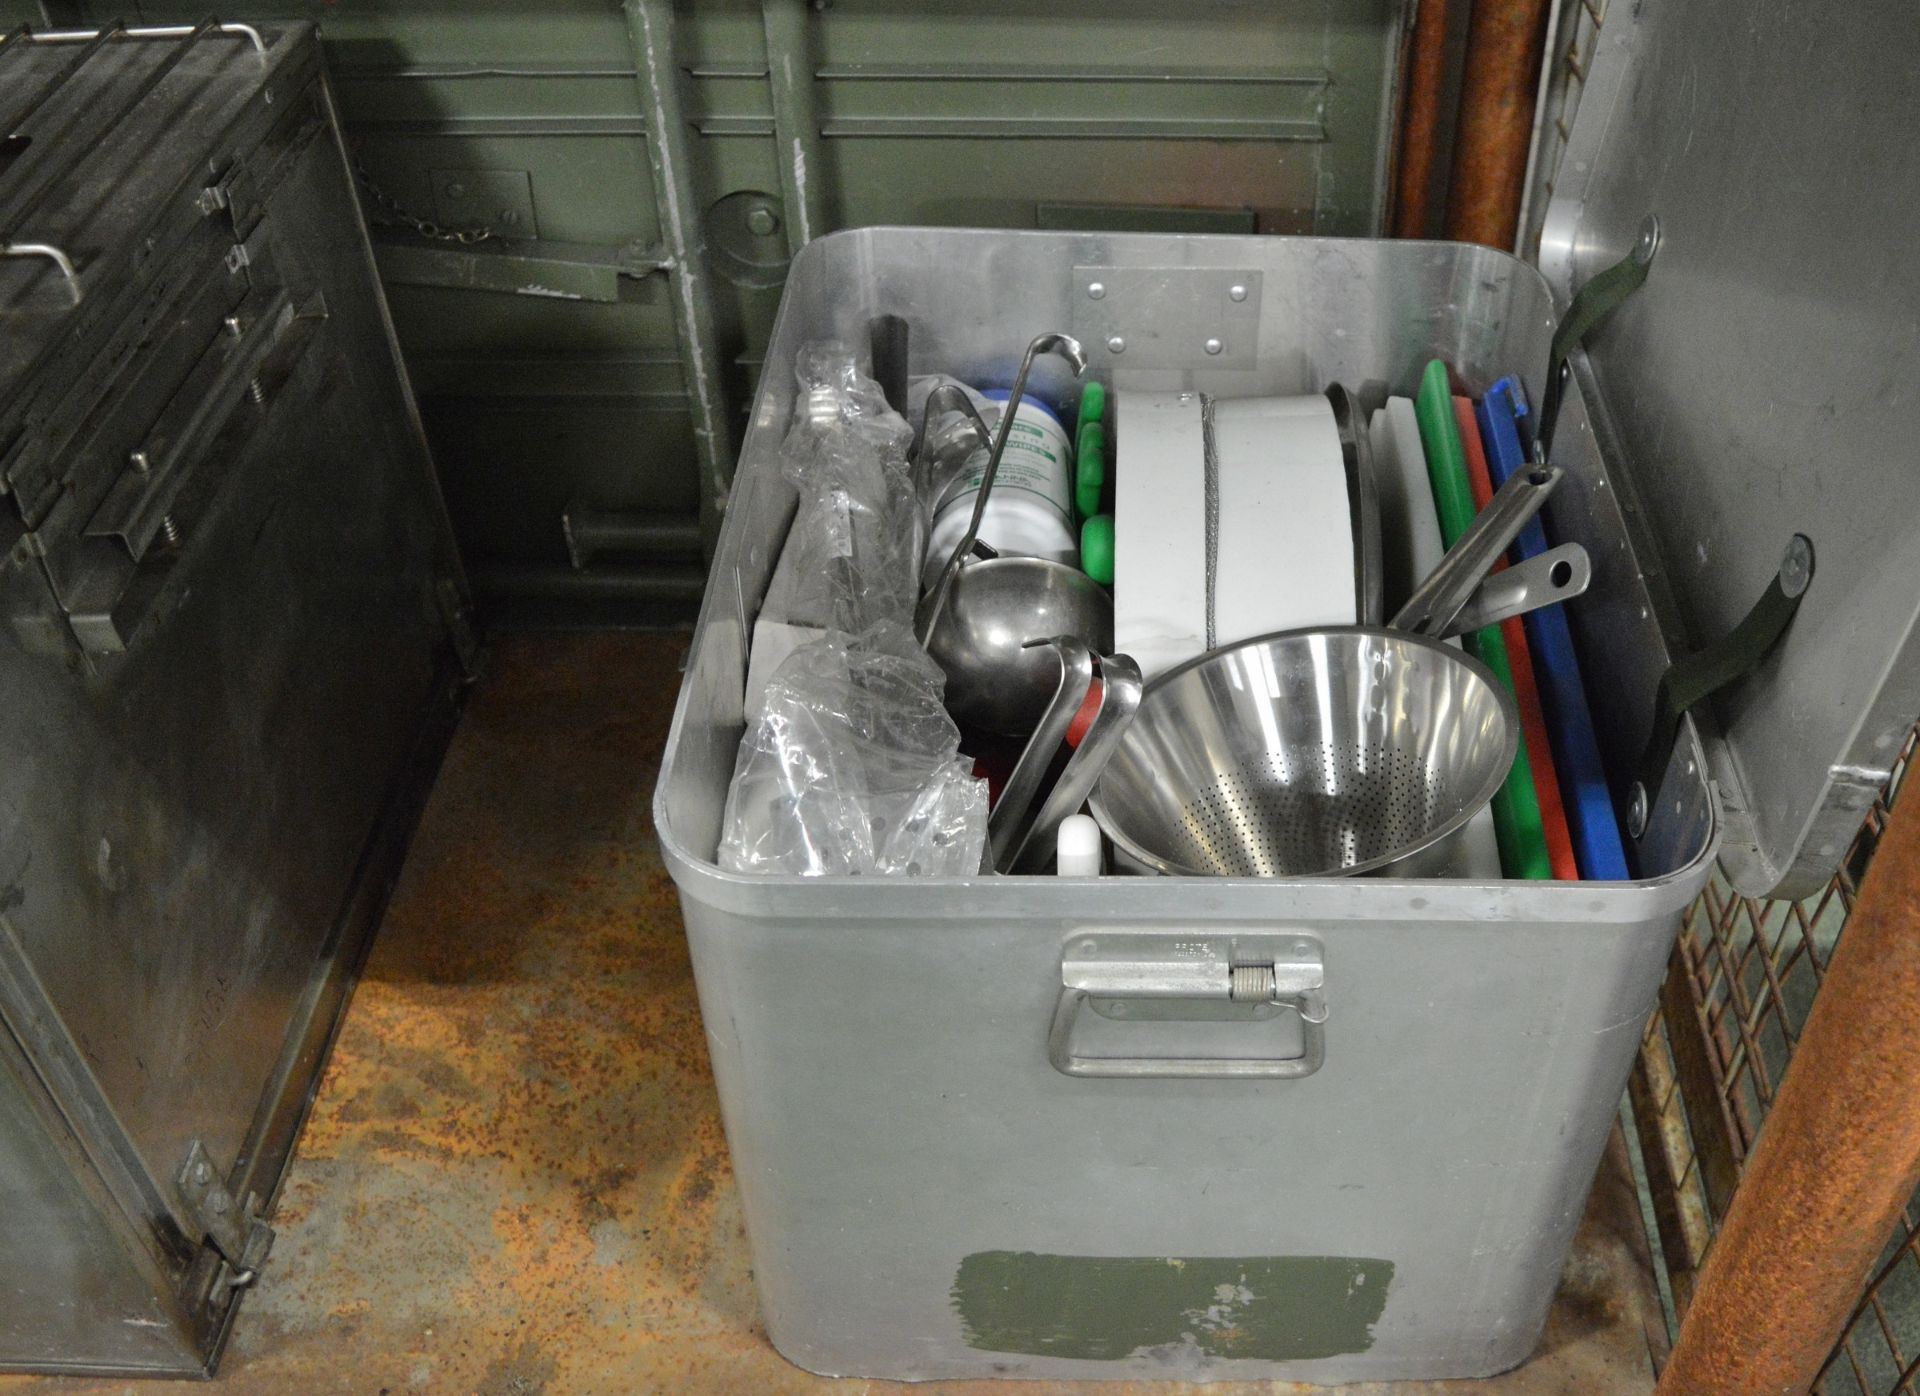 Field Catering Kit - Cooker. Oven, Utensils in storage box, pots, pans, fire blanket box - Image 5 of 5